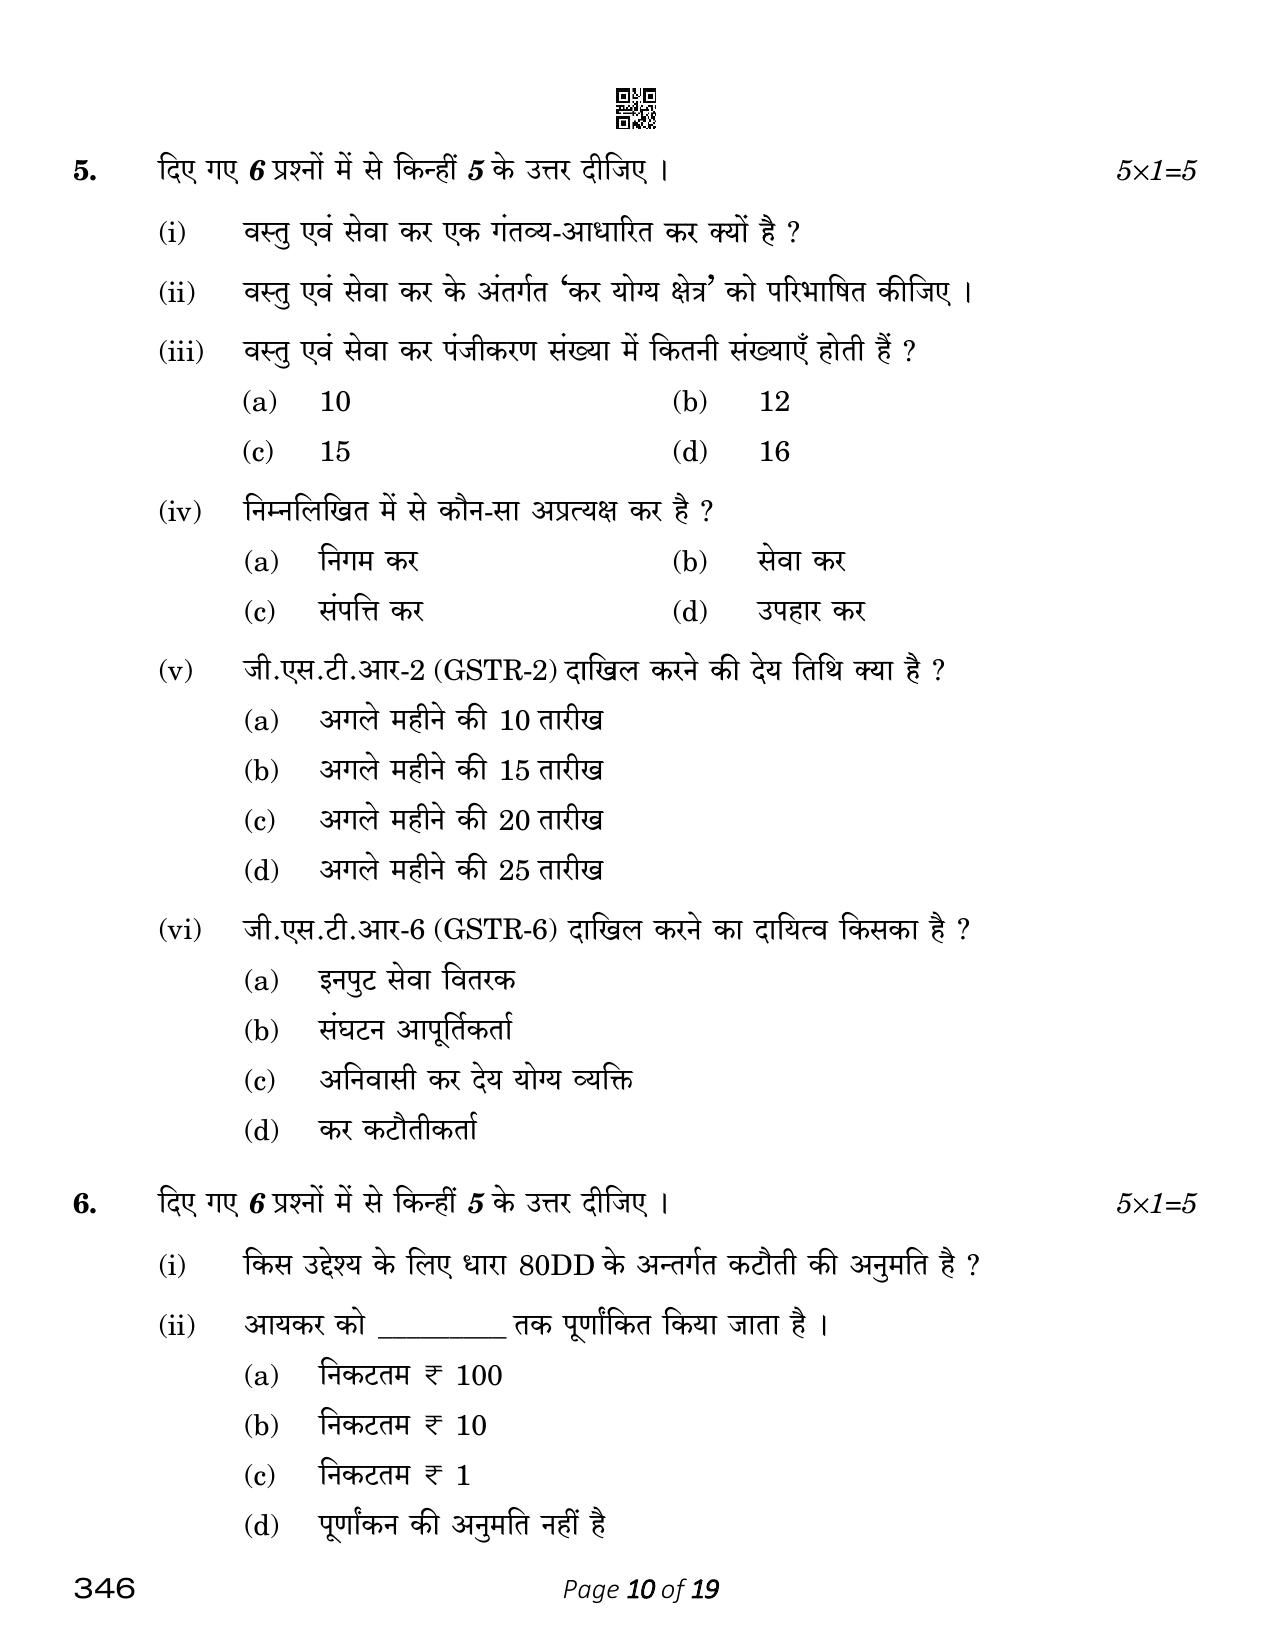 CBSE Class 12 Taxation (Compartment) 2023 Question Paper - Page 10